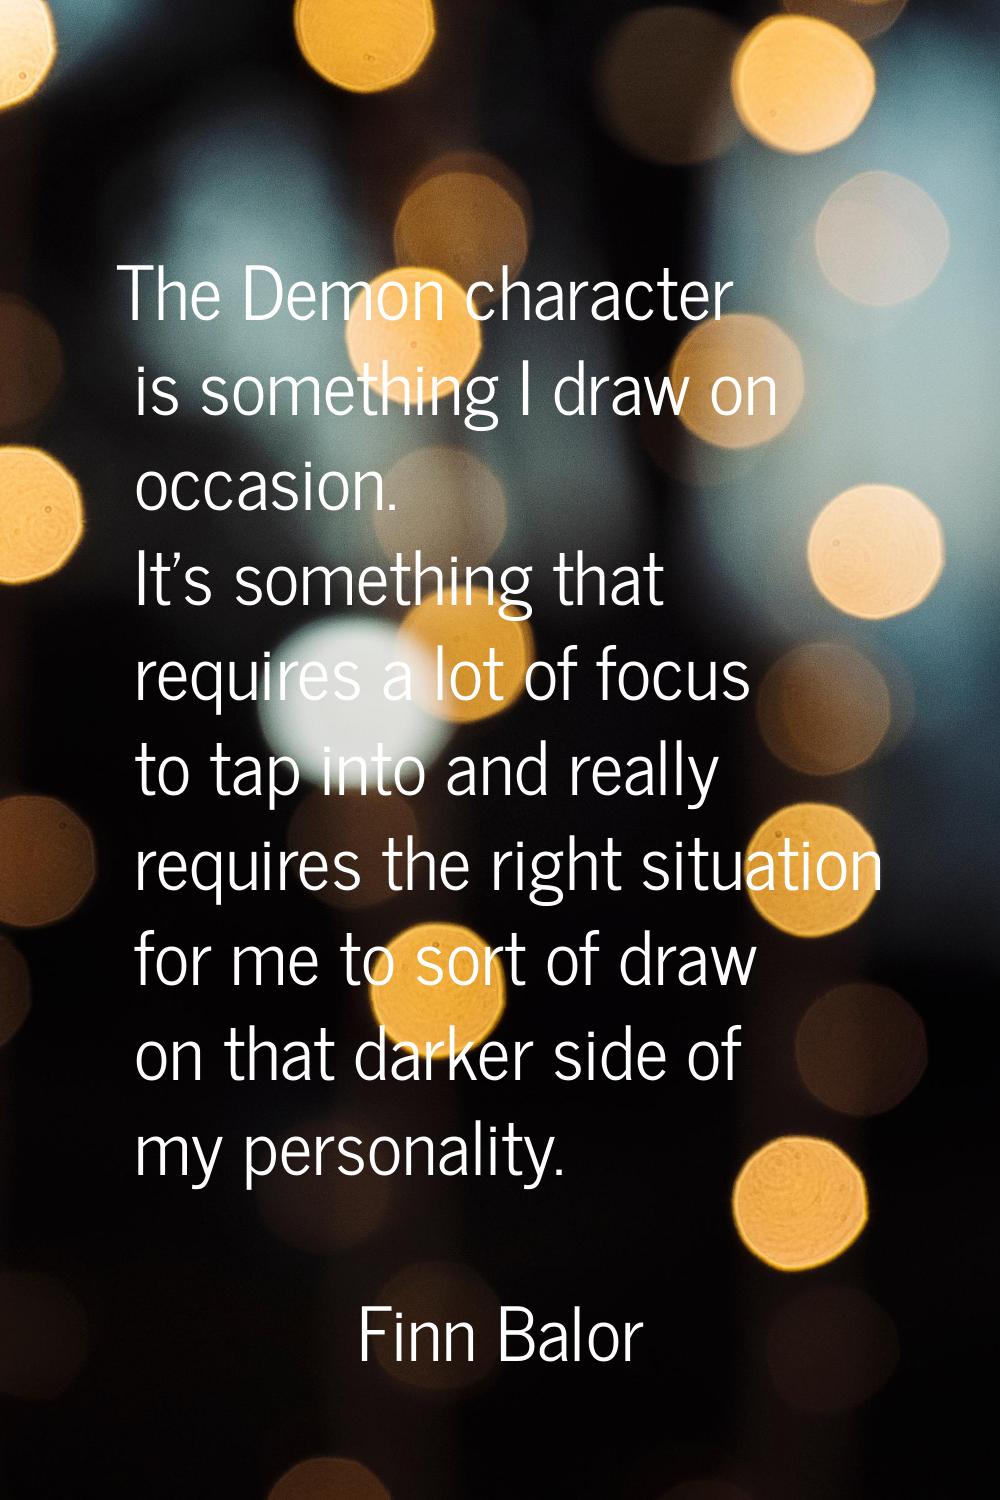 The Demon character is something I draw on occasion. It's something that requires a lot of focus to